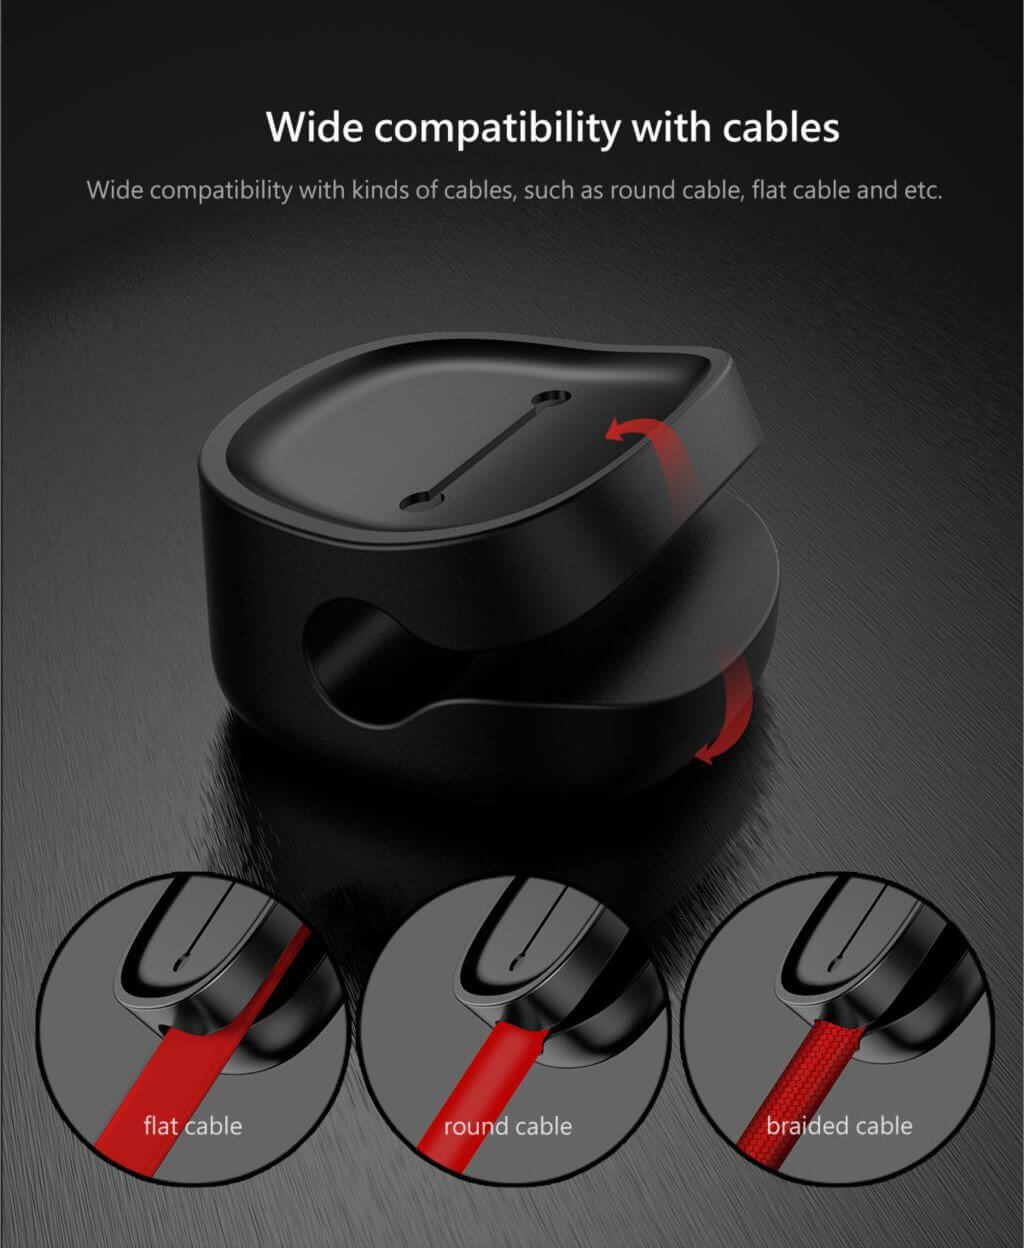 The Worlds Most Convenient Magnetic Cable Management Holder